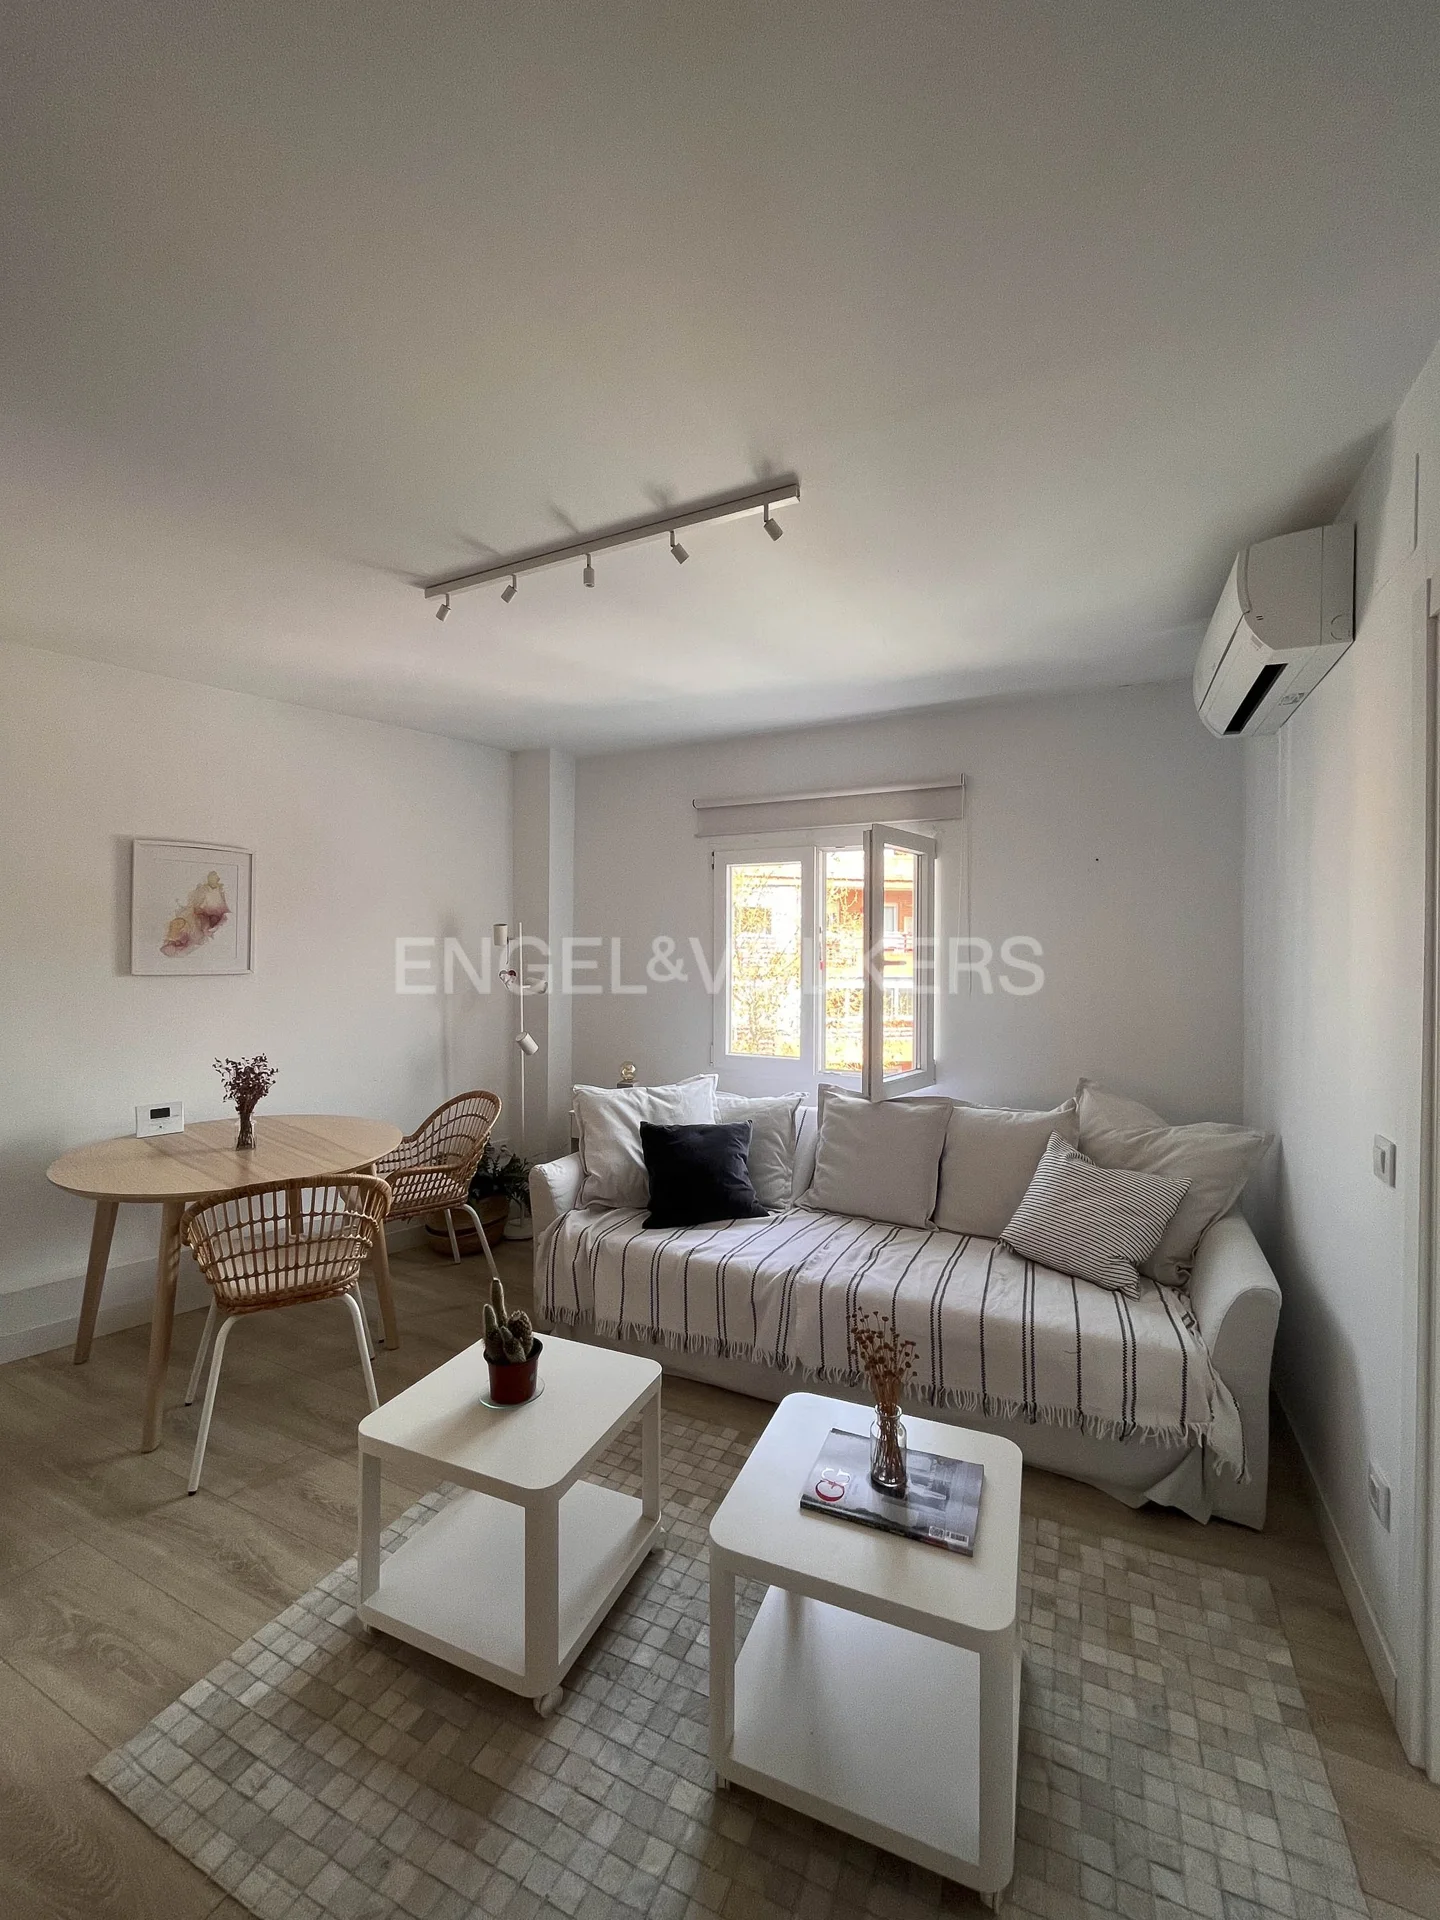 Furnished apartment on Calle del Capitán Blanco Argibay